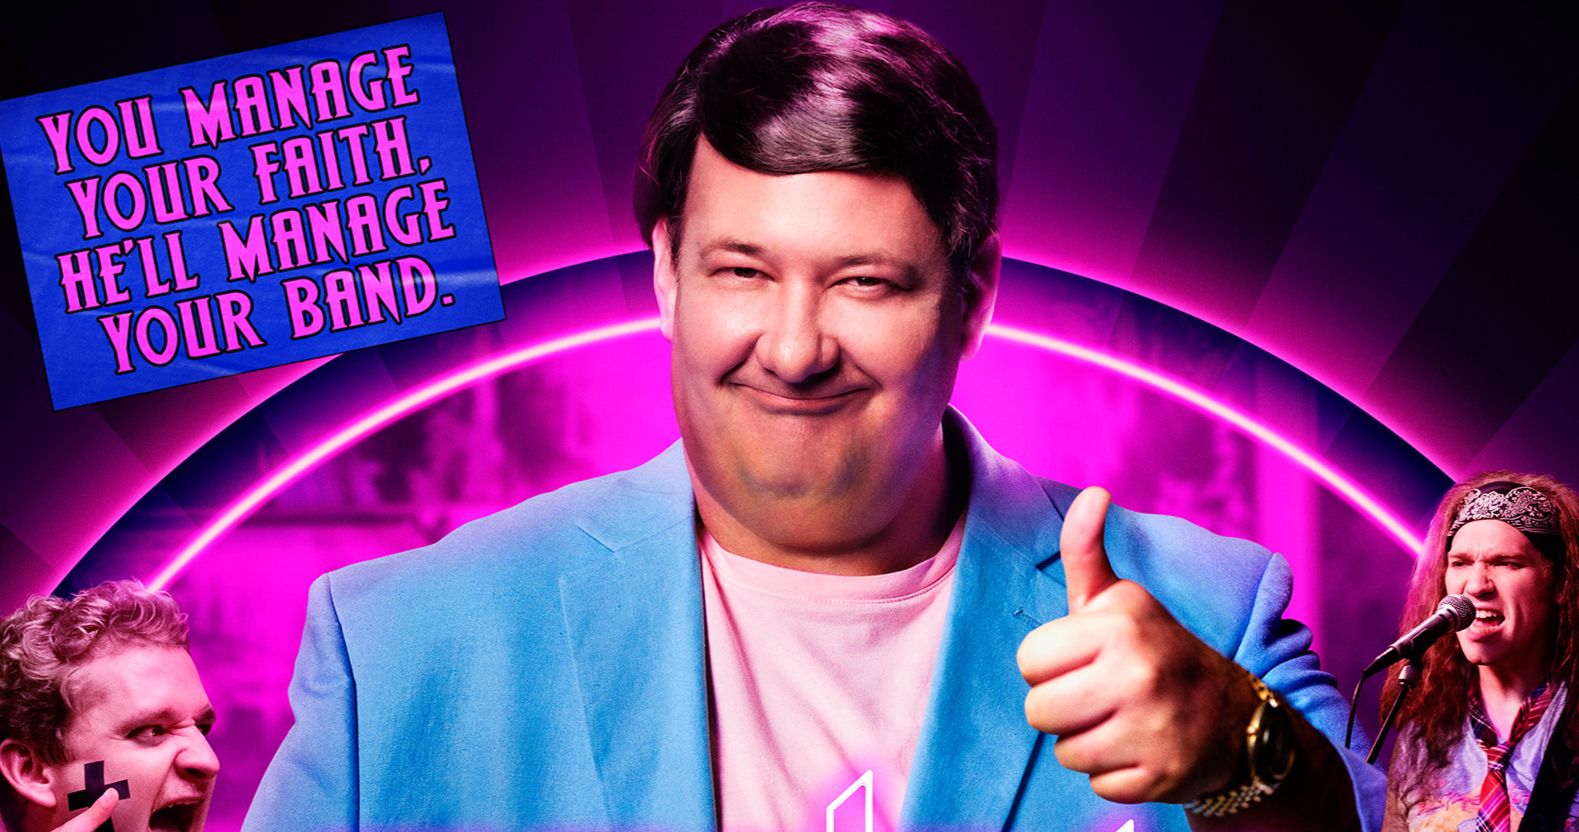 Electric Jesus Trailer Goes Full Hair Metal with Brian Baumgartner from The Office